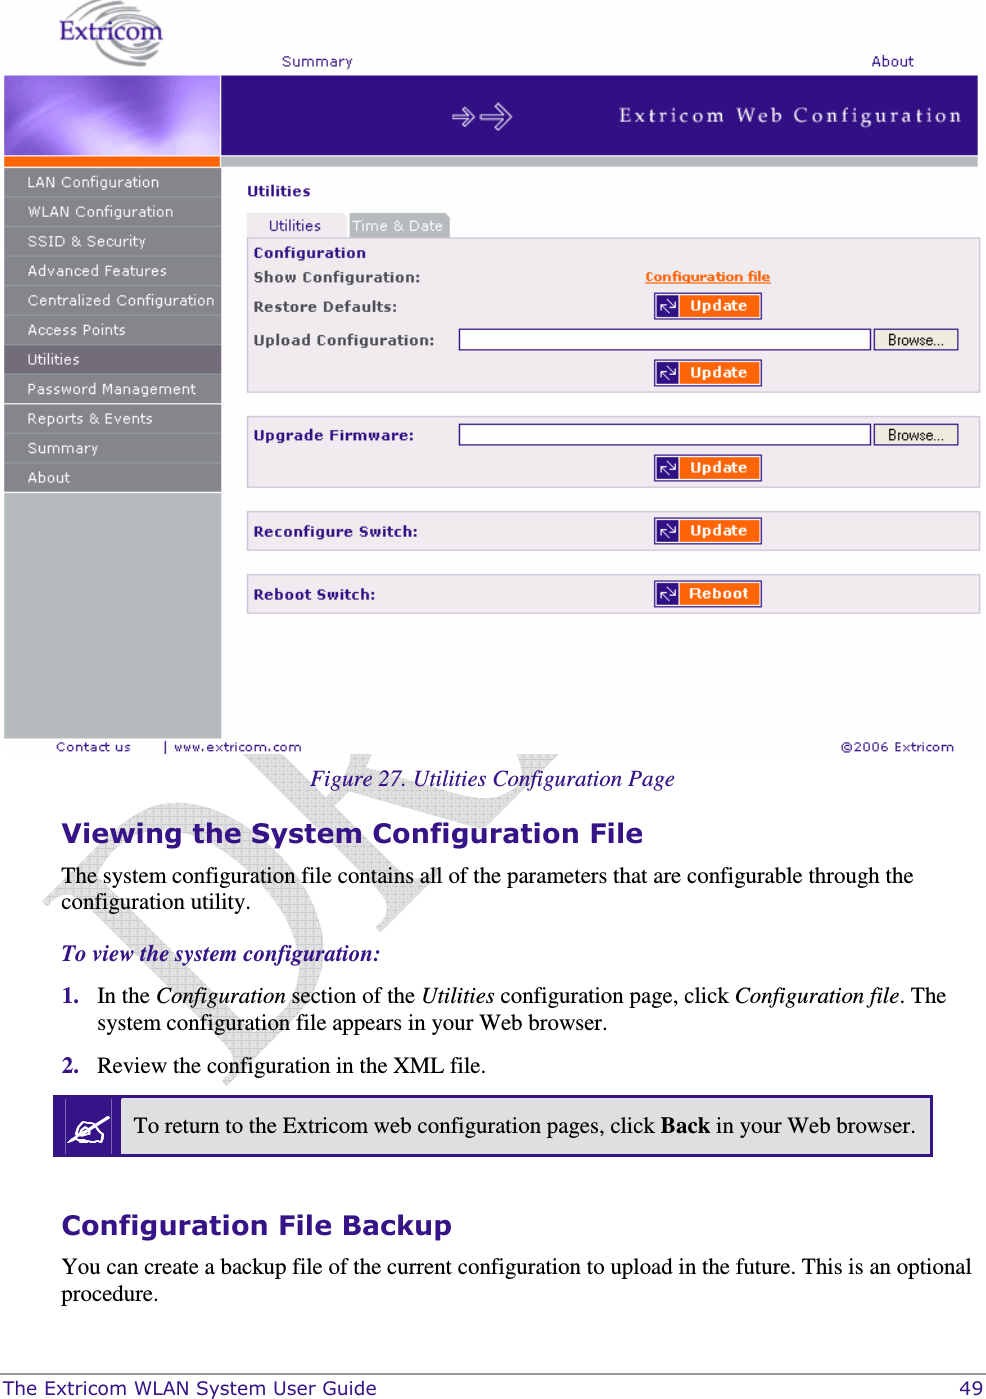  The Extricom WLAN System User Guide    49   Figure 27. Utilities Configuration Page Viewing the System Configuration File The system configuration file contains all of the parameters that are configurable through the configuration utility. To view the system configuration: 1. In the Configuration section of the Utilities configuration page, click Configuration file. The system configuration file appears in your Web browser.  2. Review the configuration in the XML file.   To return to the Extricom web configuration pages, click Back in your Web browser.  Configuration File Backup You can create a backup file of the current configuration to upload in the future. This is an optional procedure. 